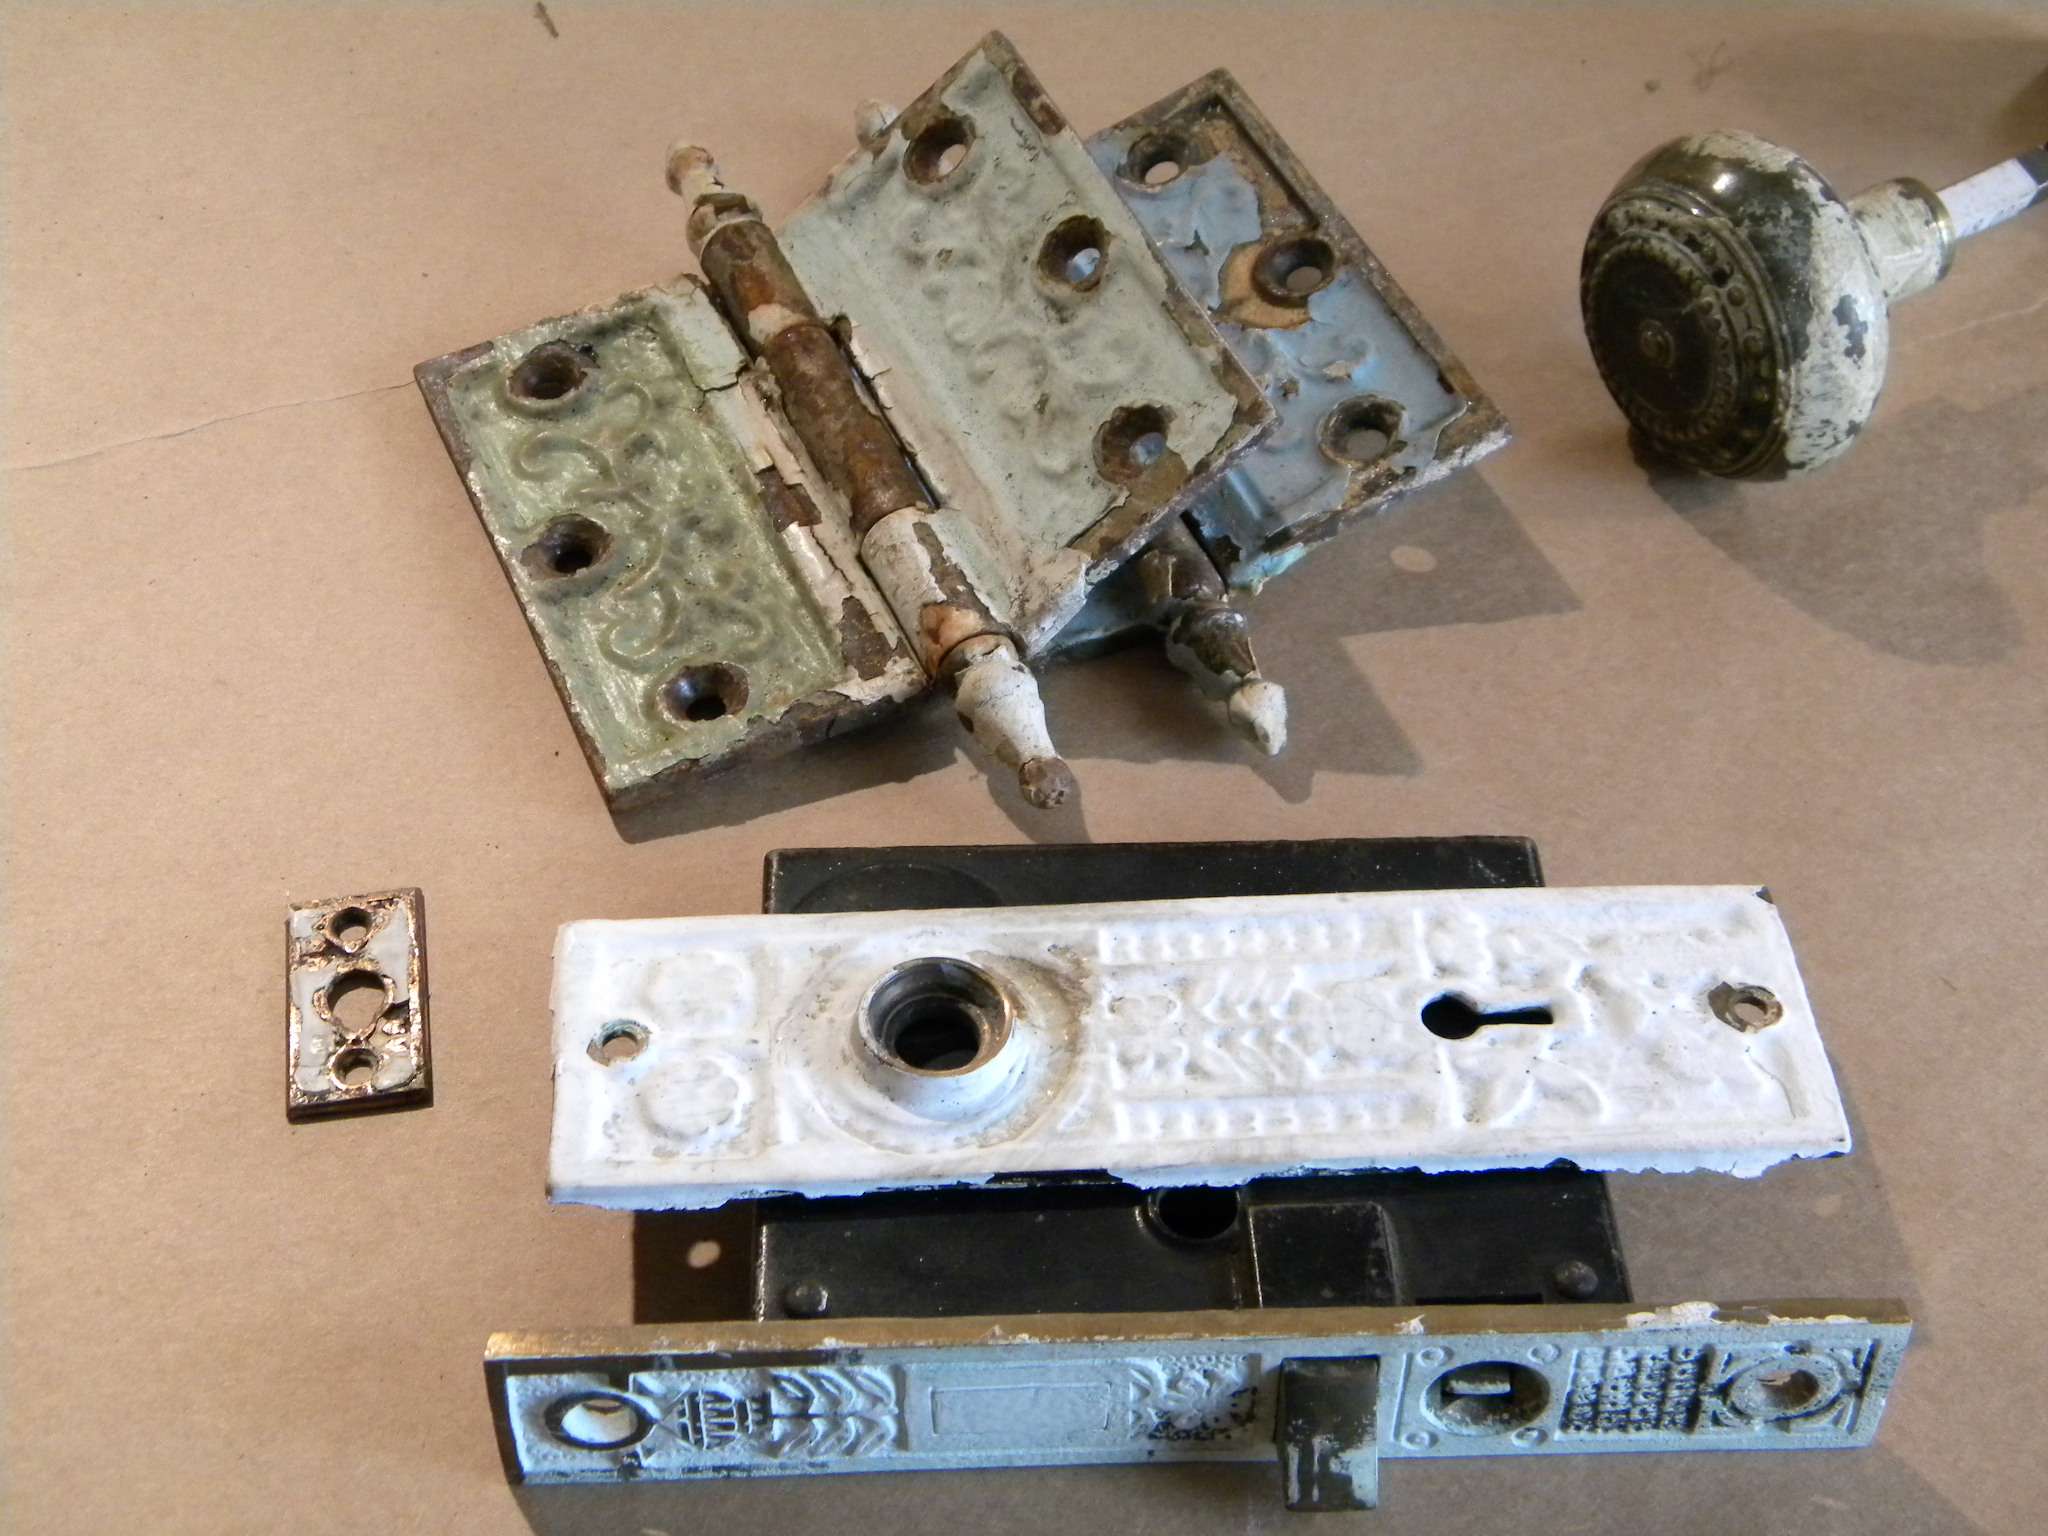 A Guide to Stripping Painted Hardware